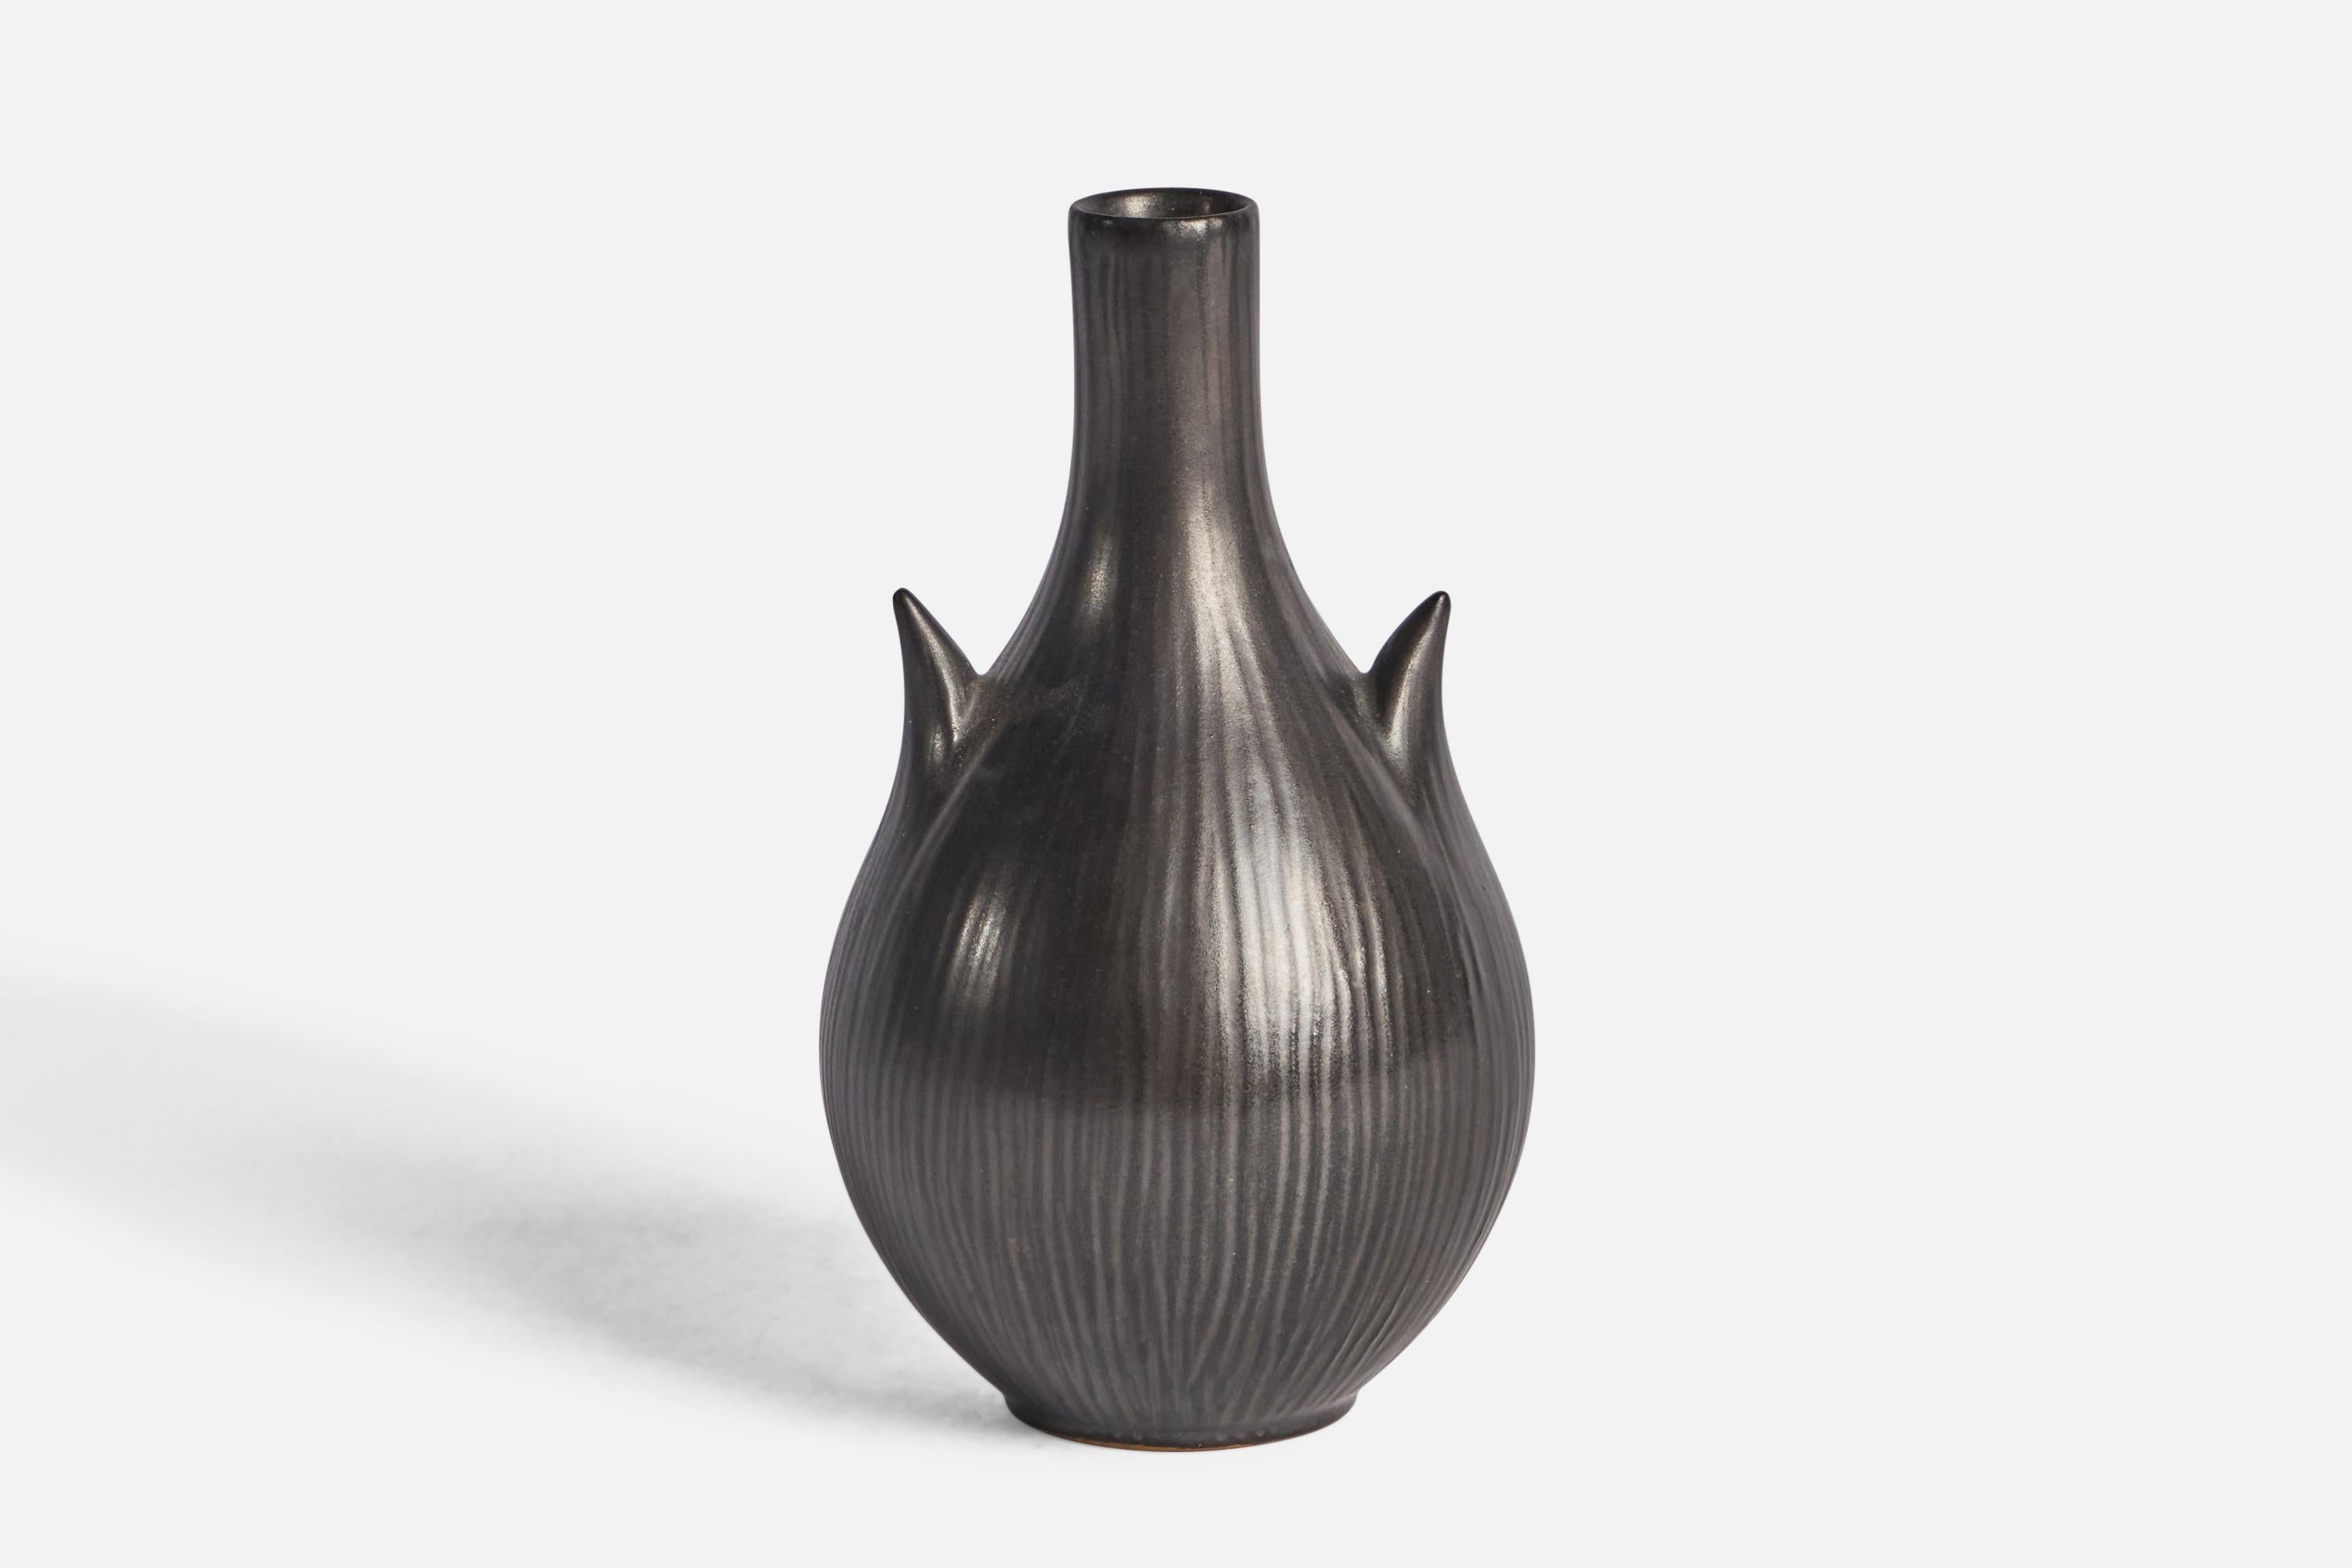 A black-glazed and incised vase designed and produced by Ejvind Nielsen, Denmark, c. 1960s.

Signature on bottom shown in photo